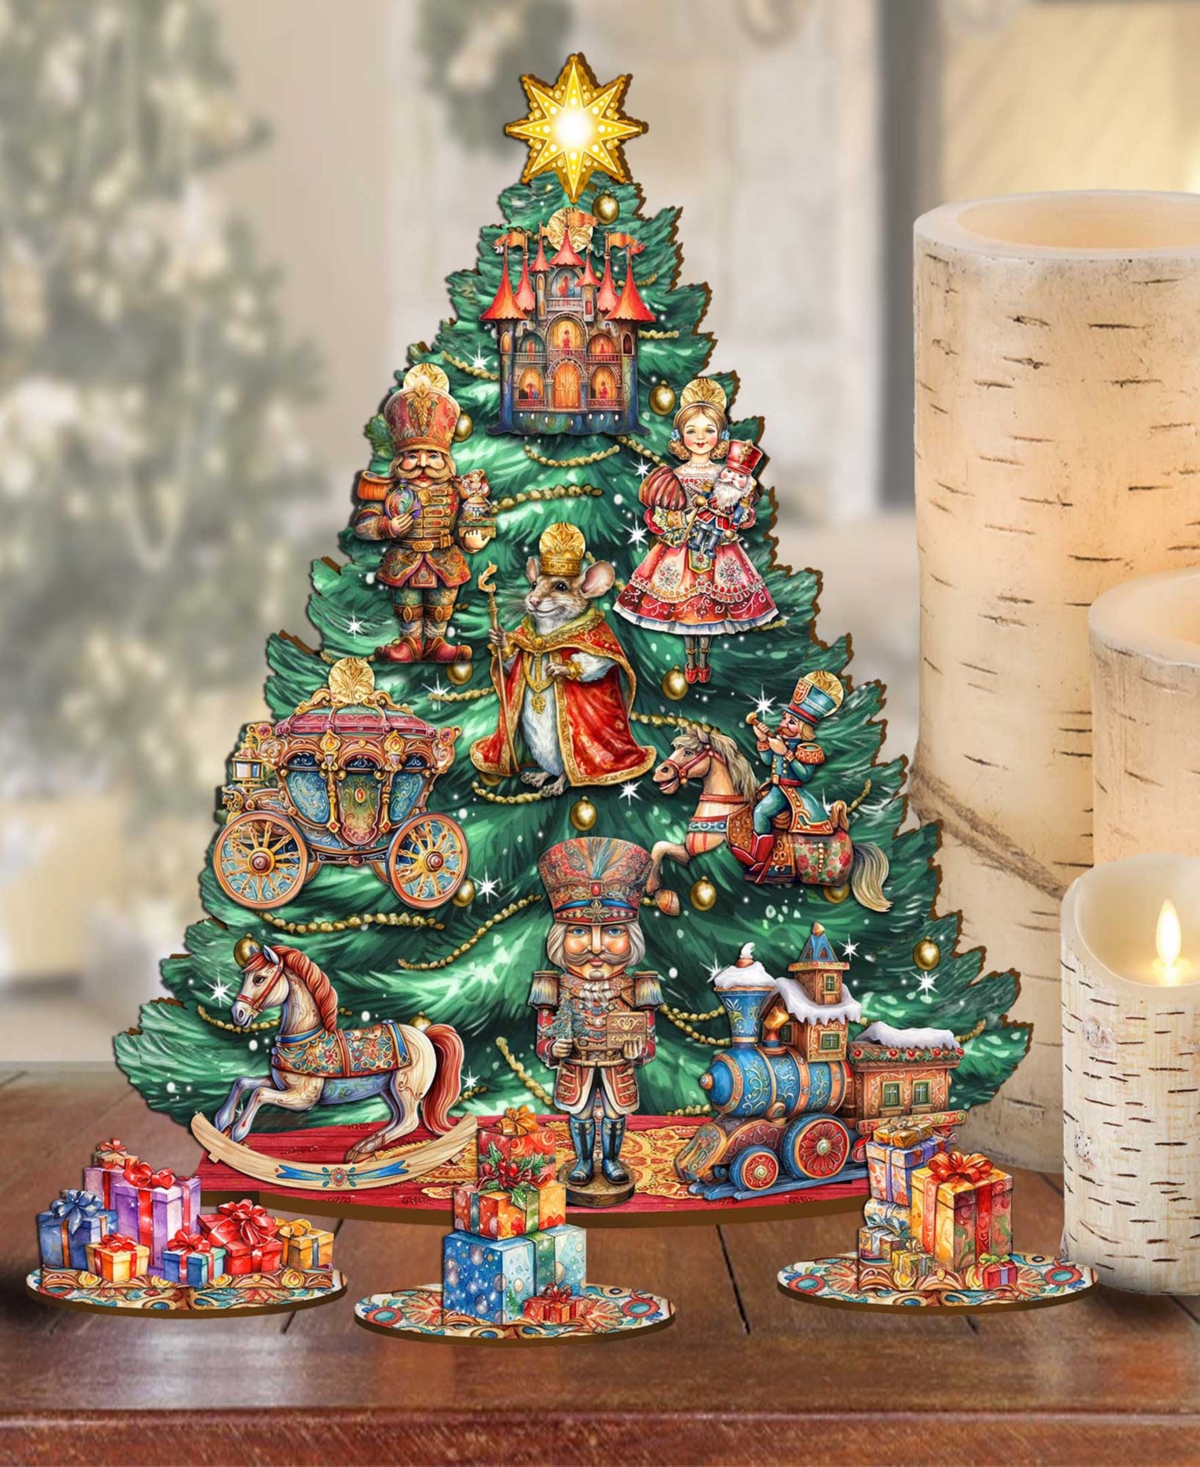 Designocracy Nutcracker Themed Wooden Christmas Tree With Ornaments Set Of 13 G. Debrekht In Multi Color